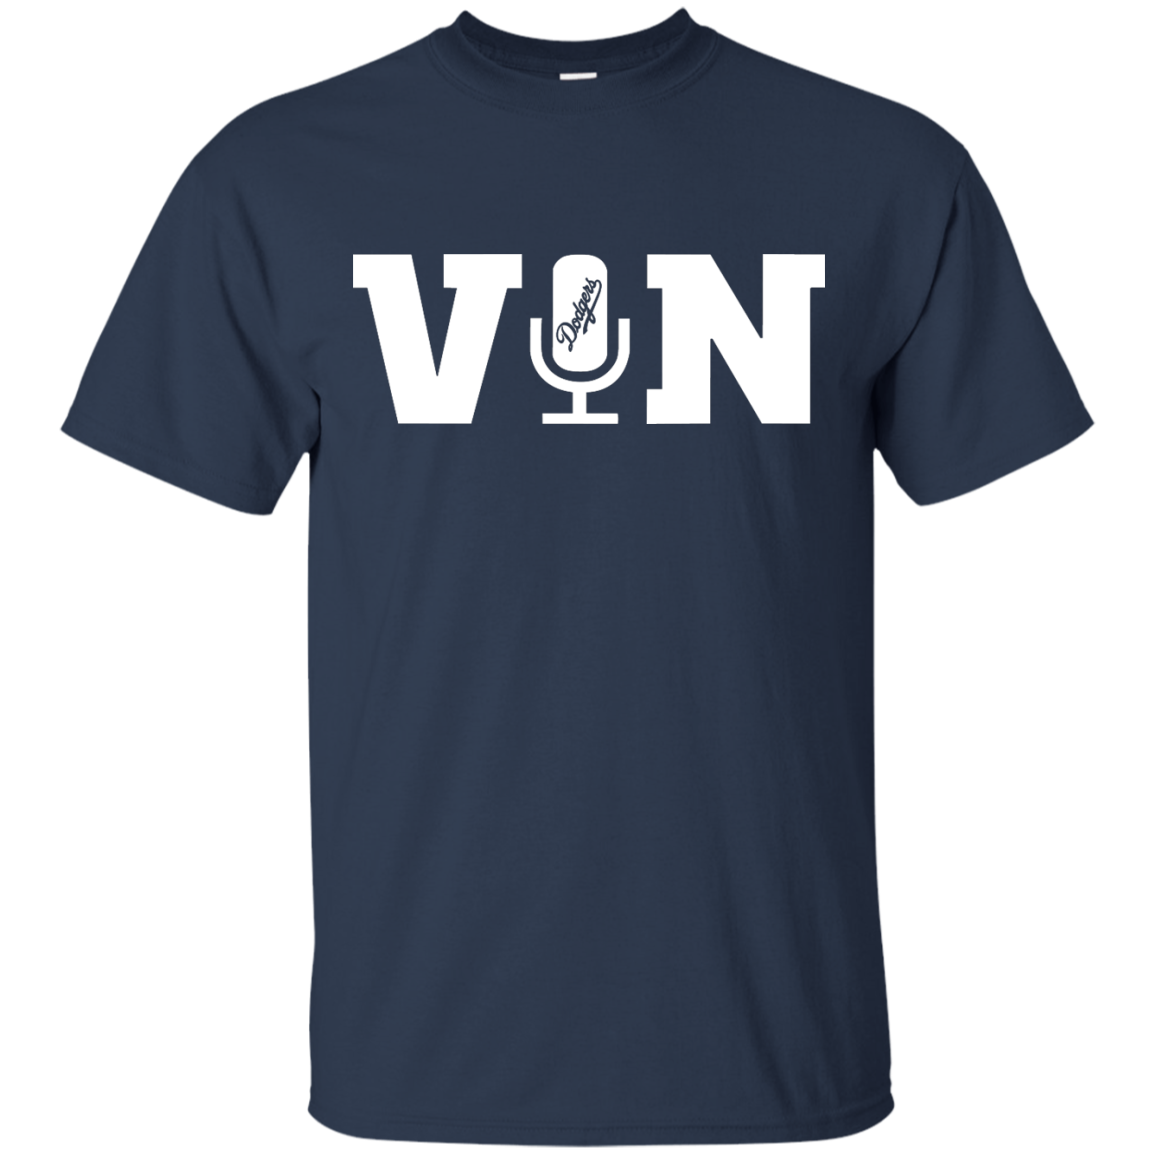 Pray For Vin Scully Singnature T-Shirt